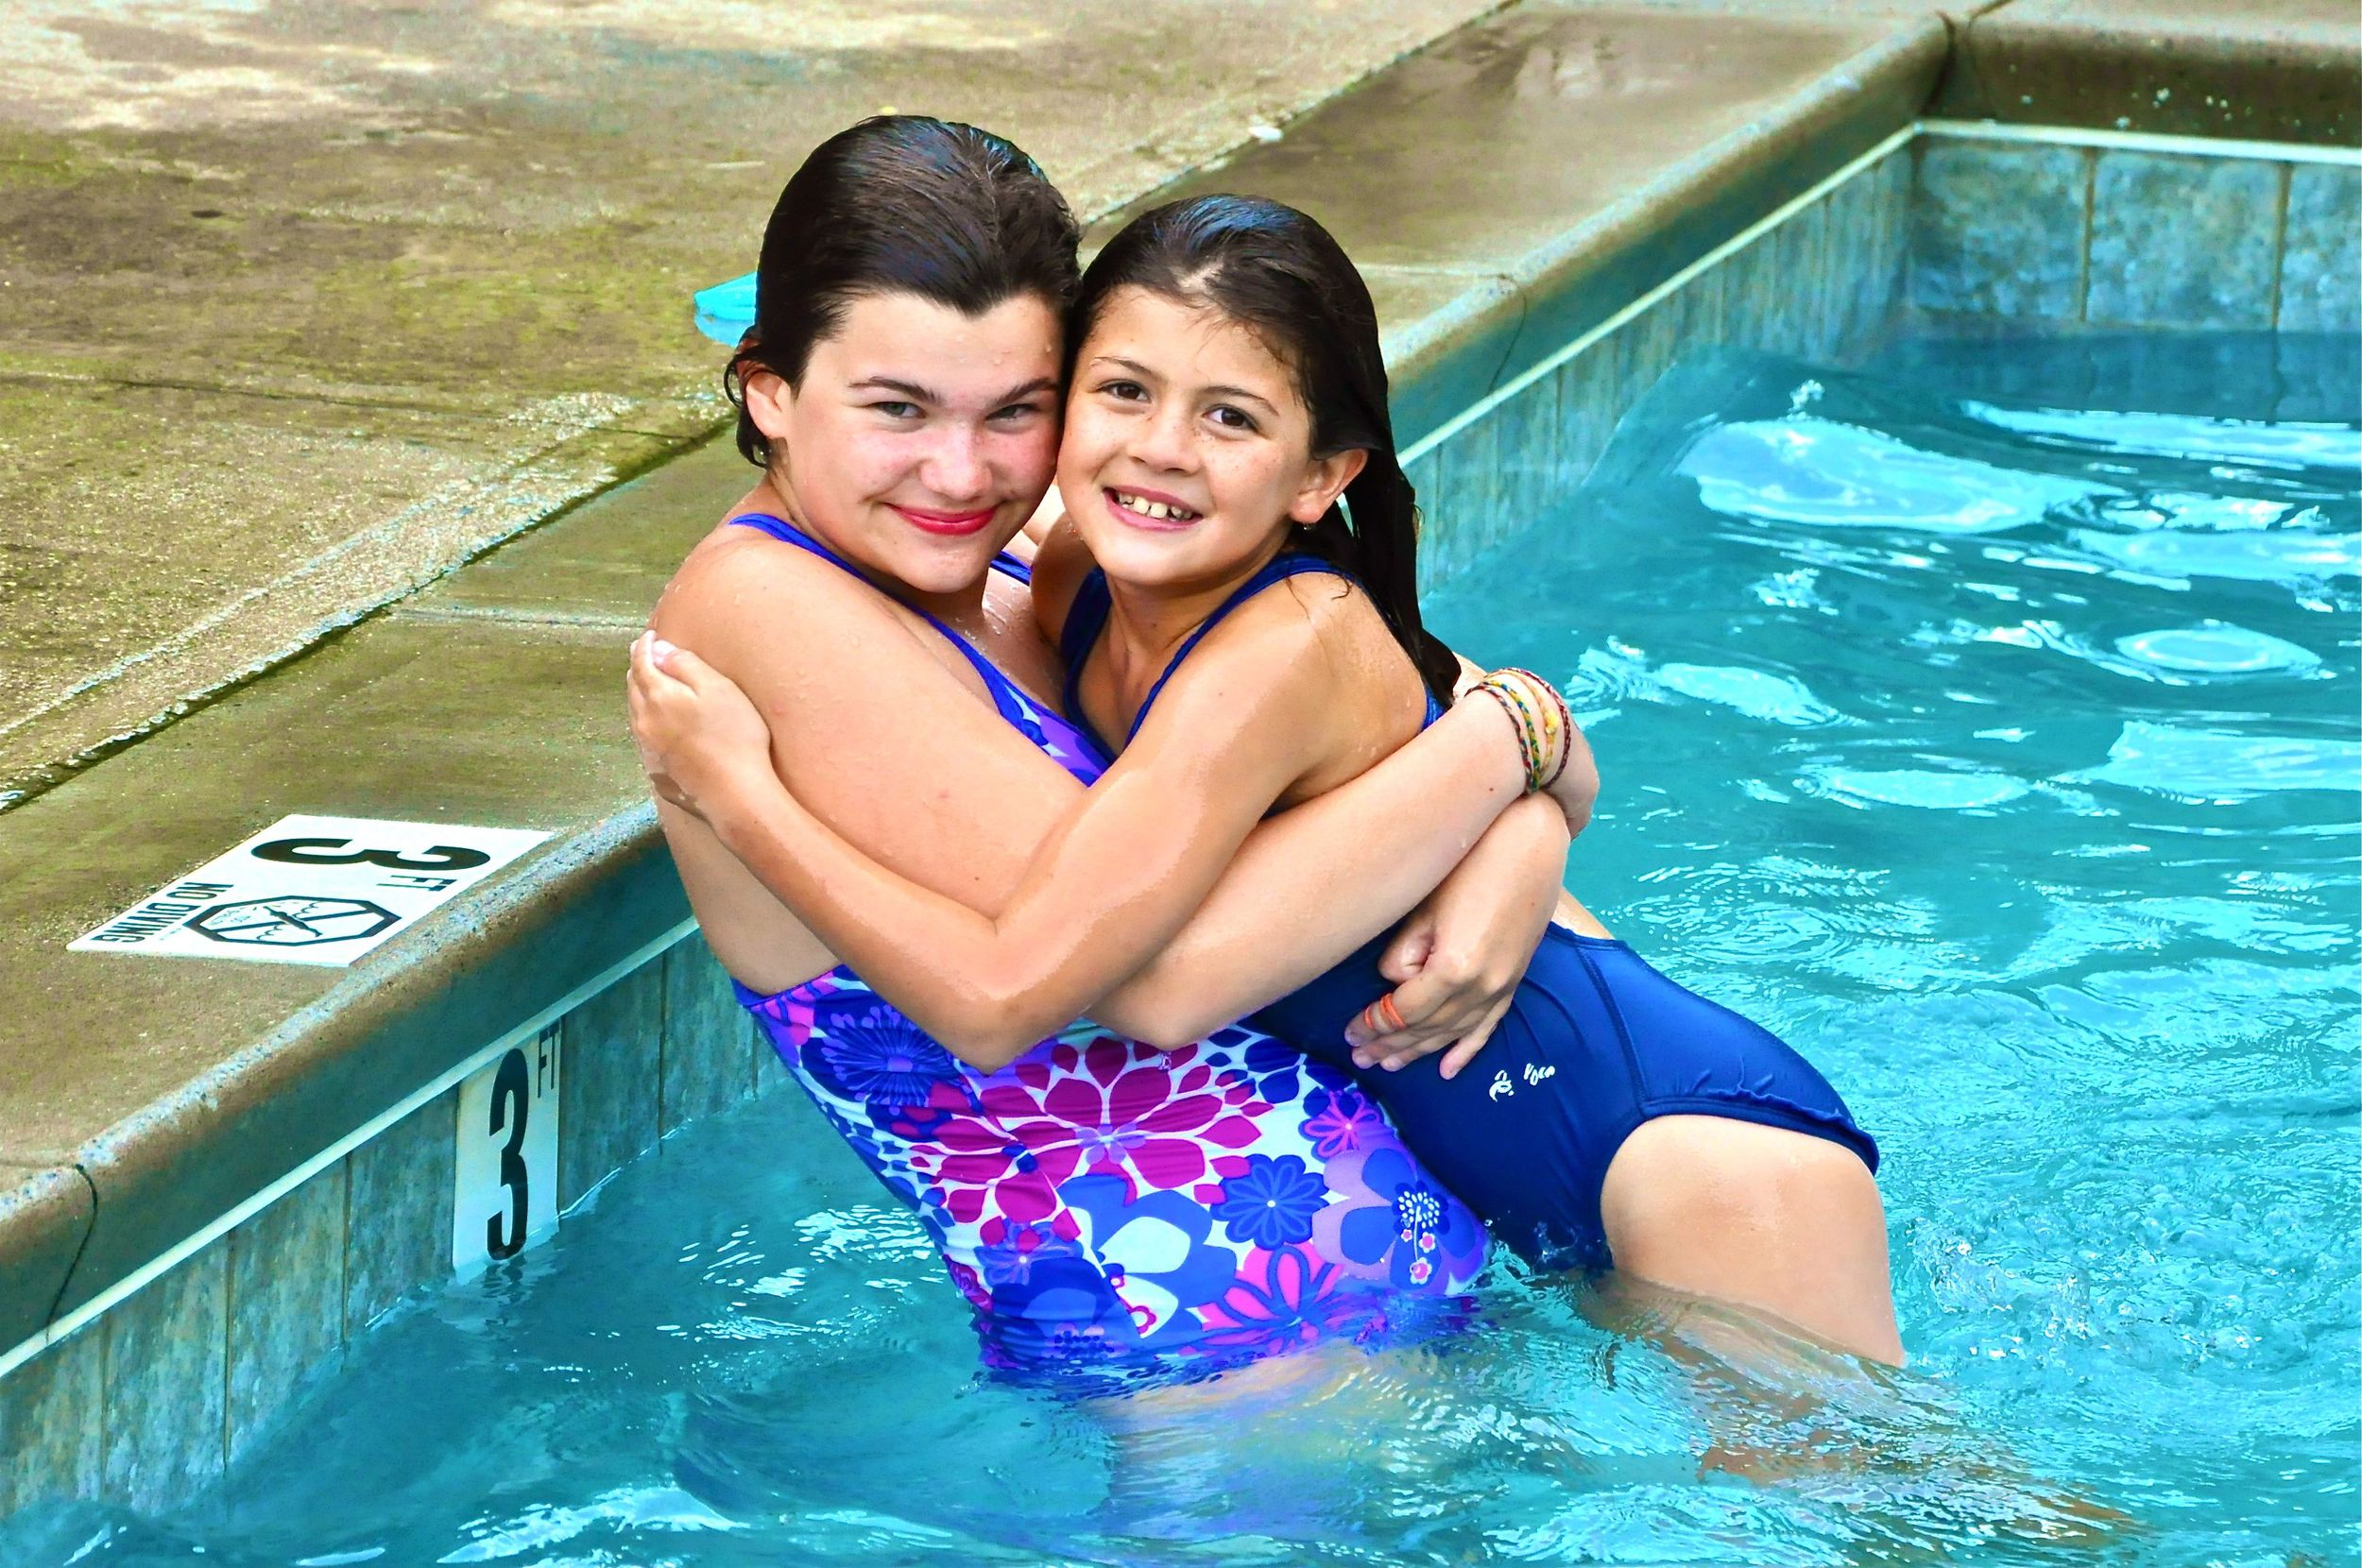 michelle-gives-morgan-a-22big-sister22-hug-in-the-pool-during-a-game-of-water-polo.jpg